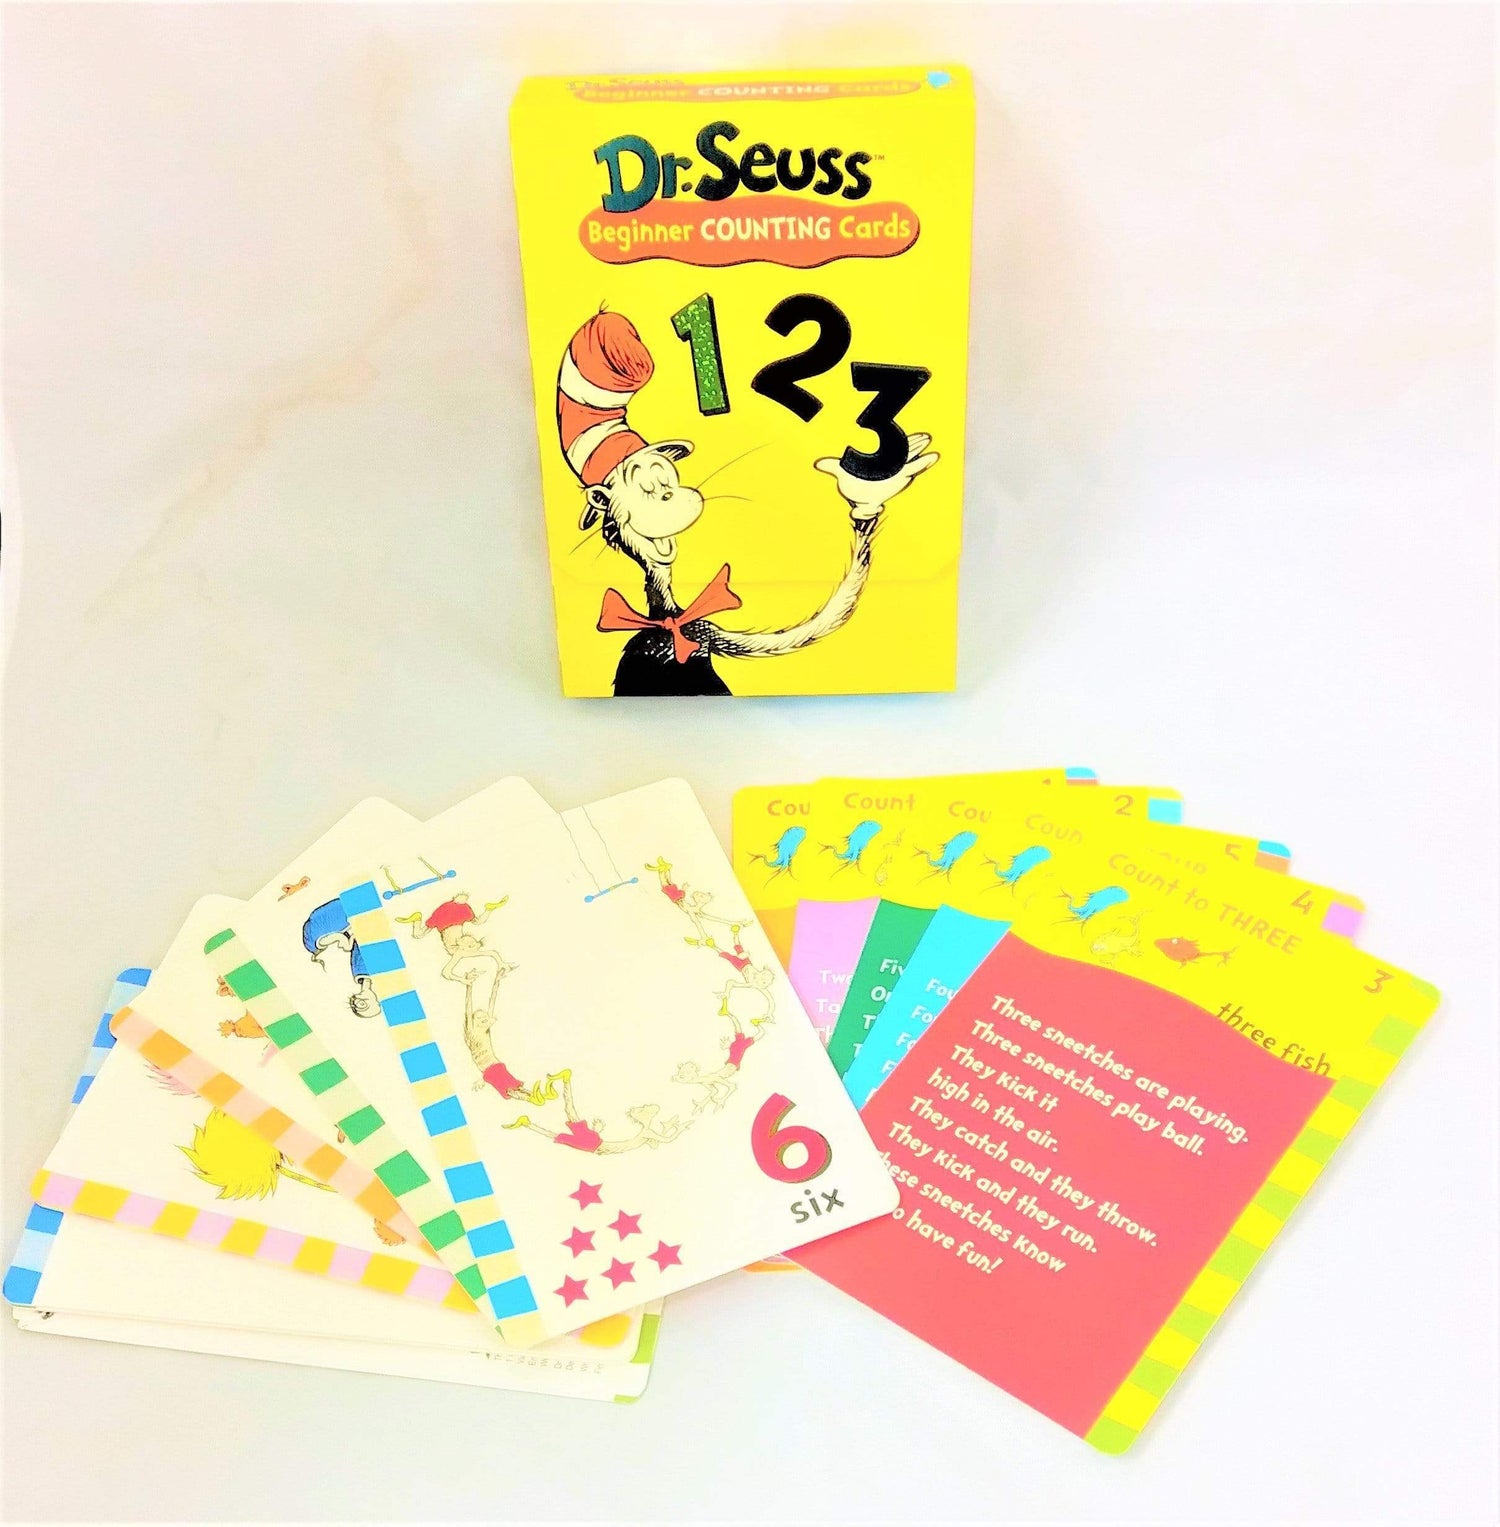 Dr. Seuss Beginner Counting Cards - 123